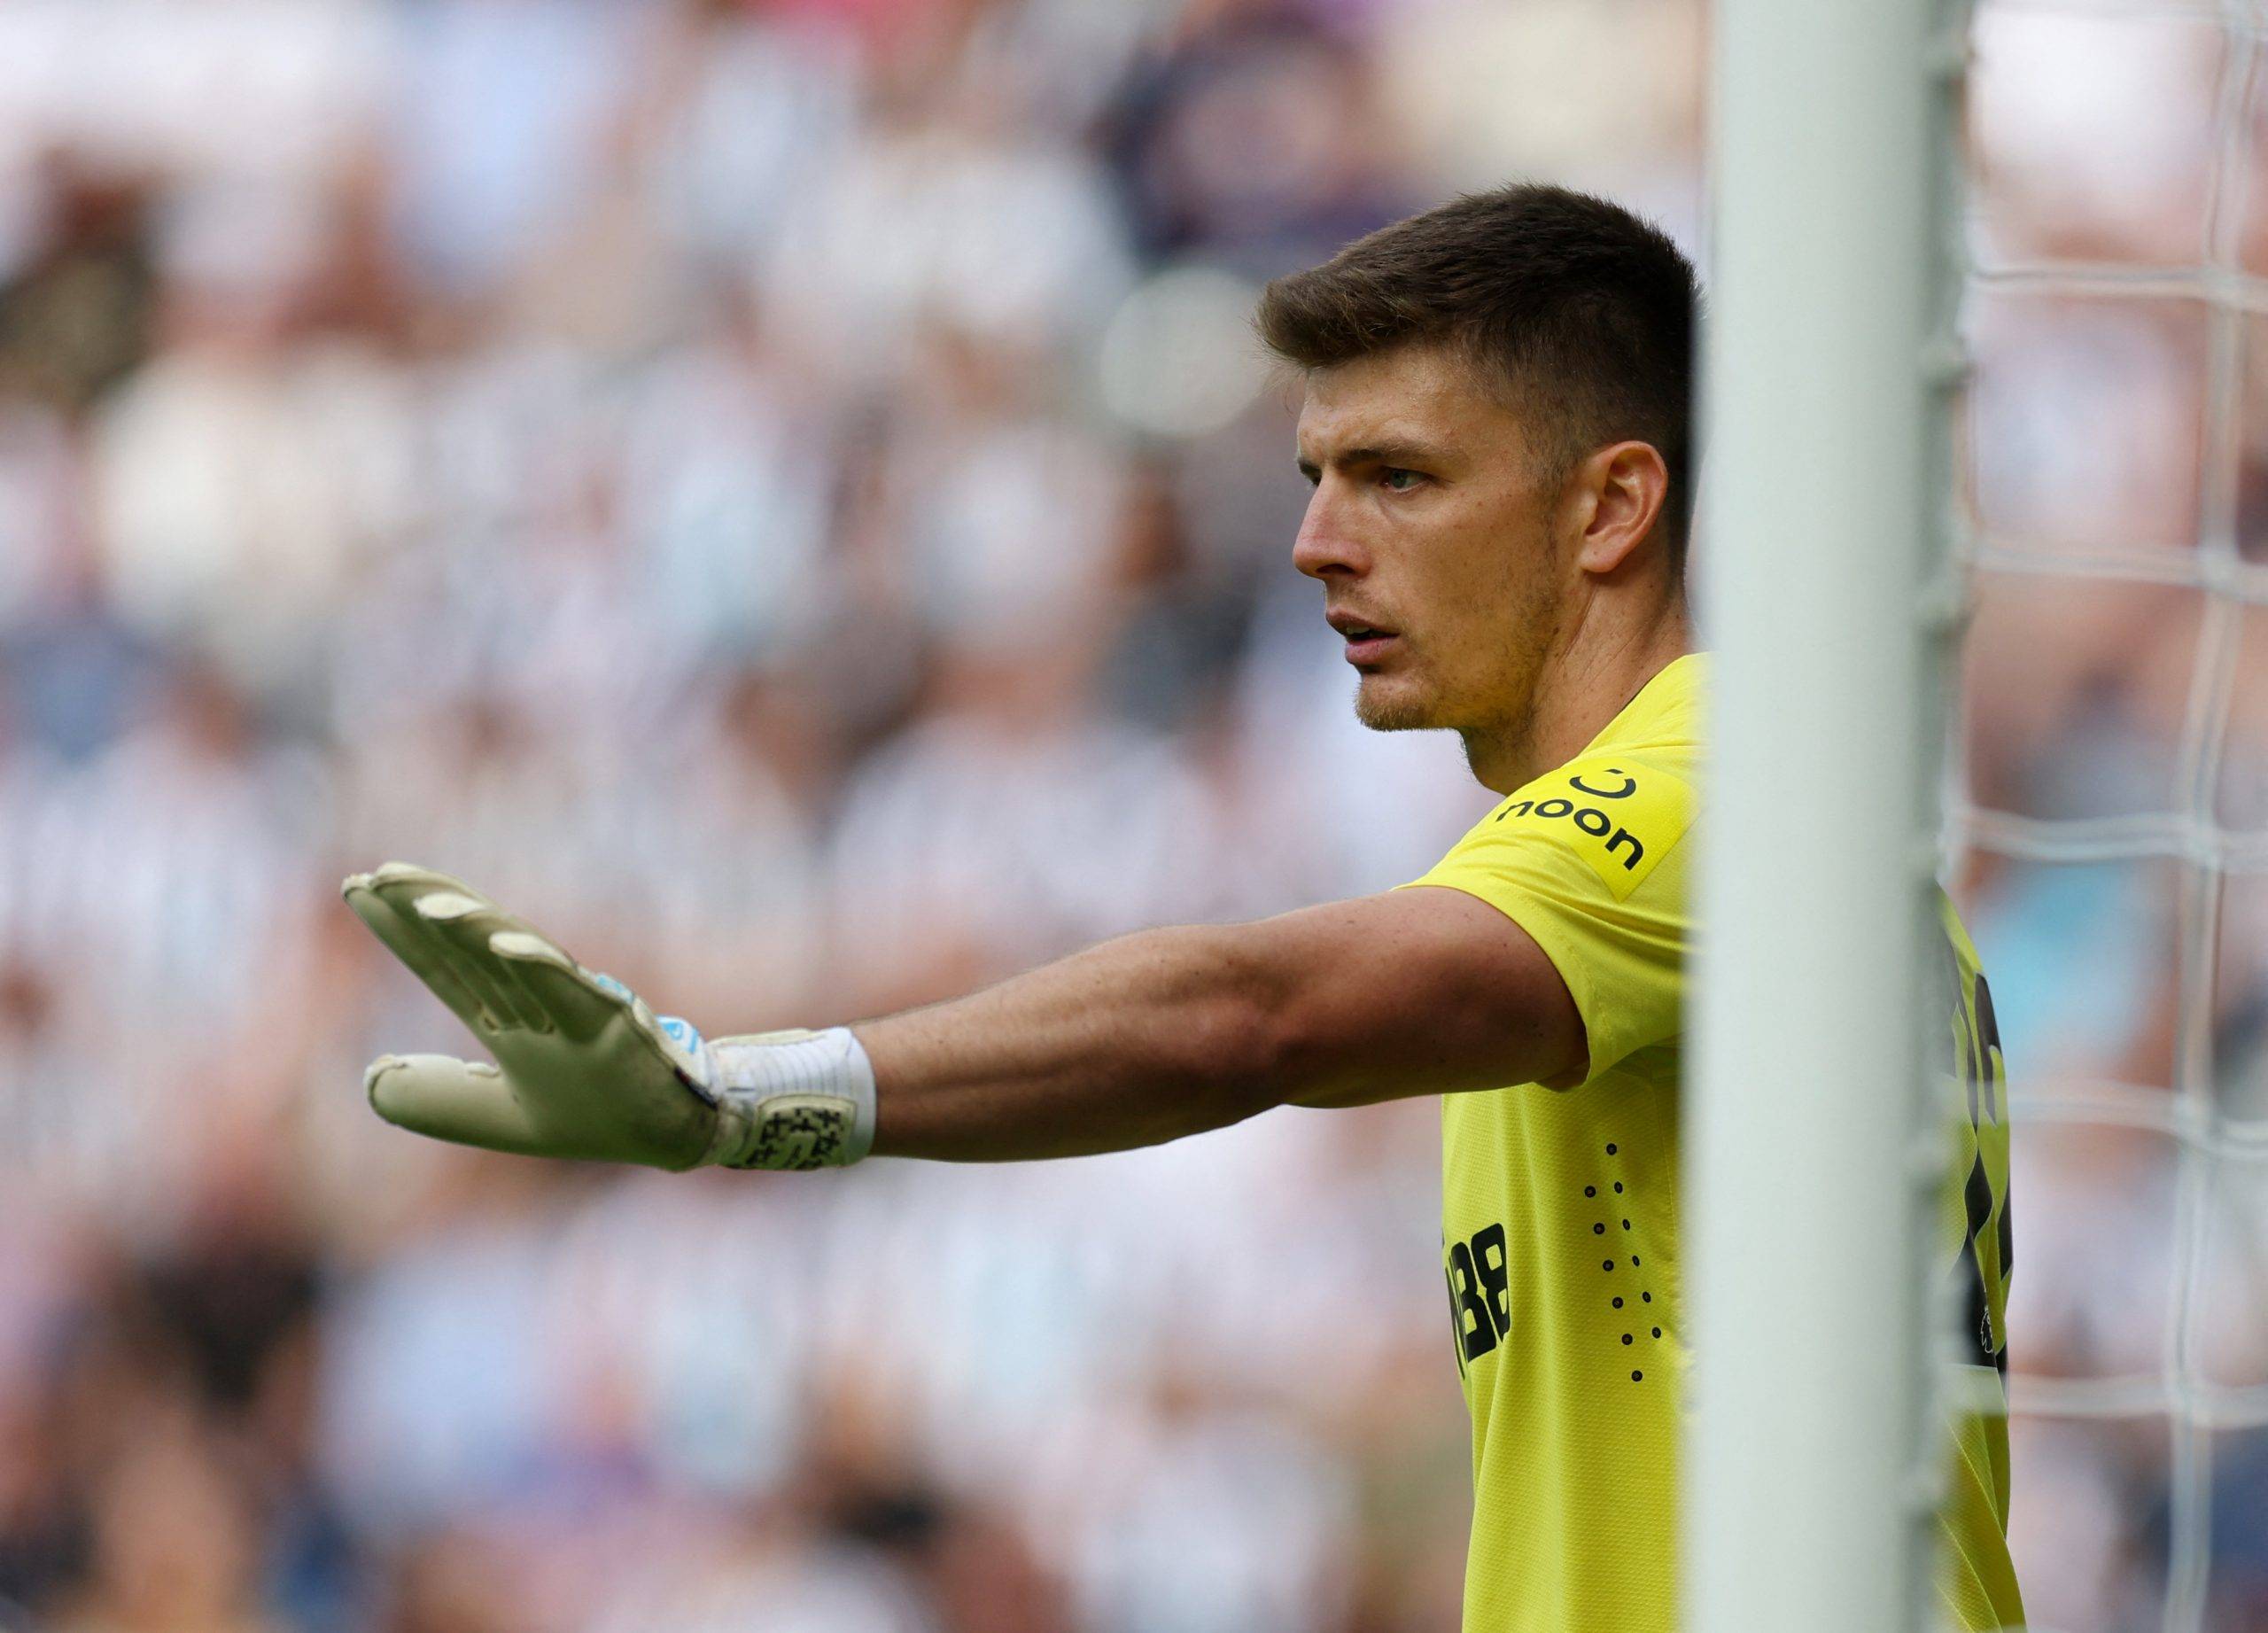 Newcastle: Jamie Redknapp slams laws after Nick Pope's red card - Newcastle United News